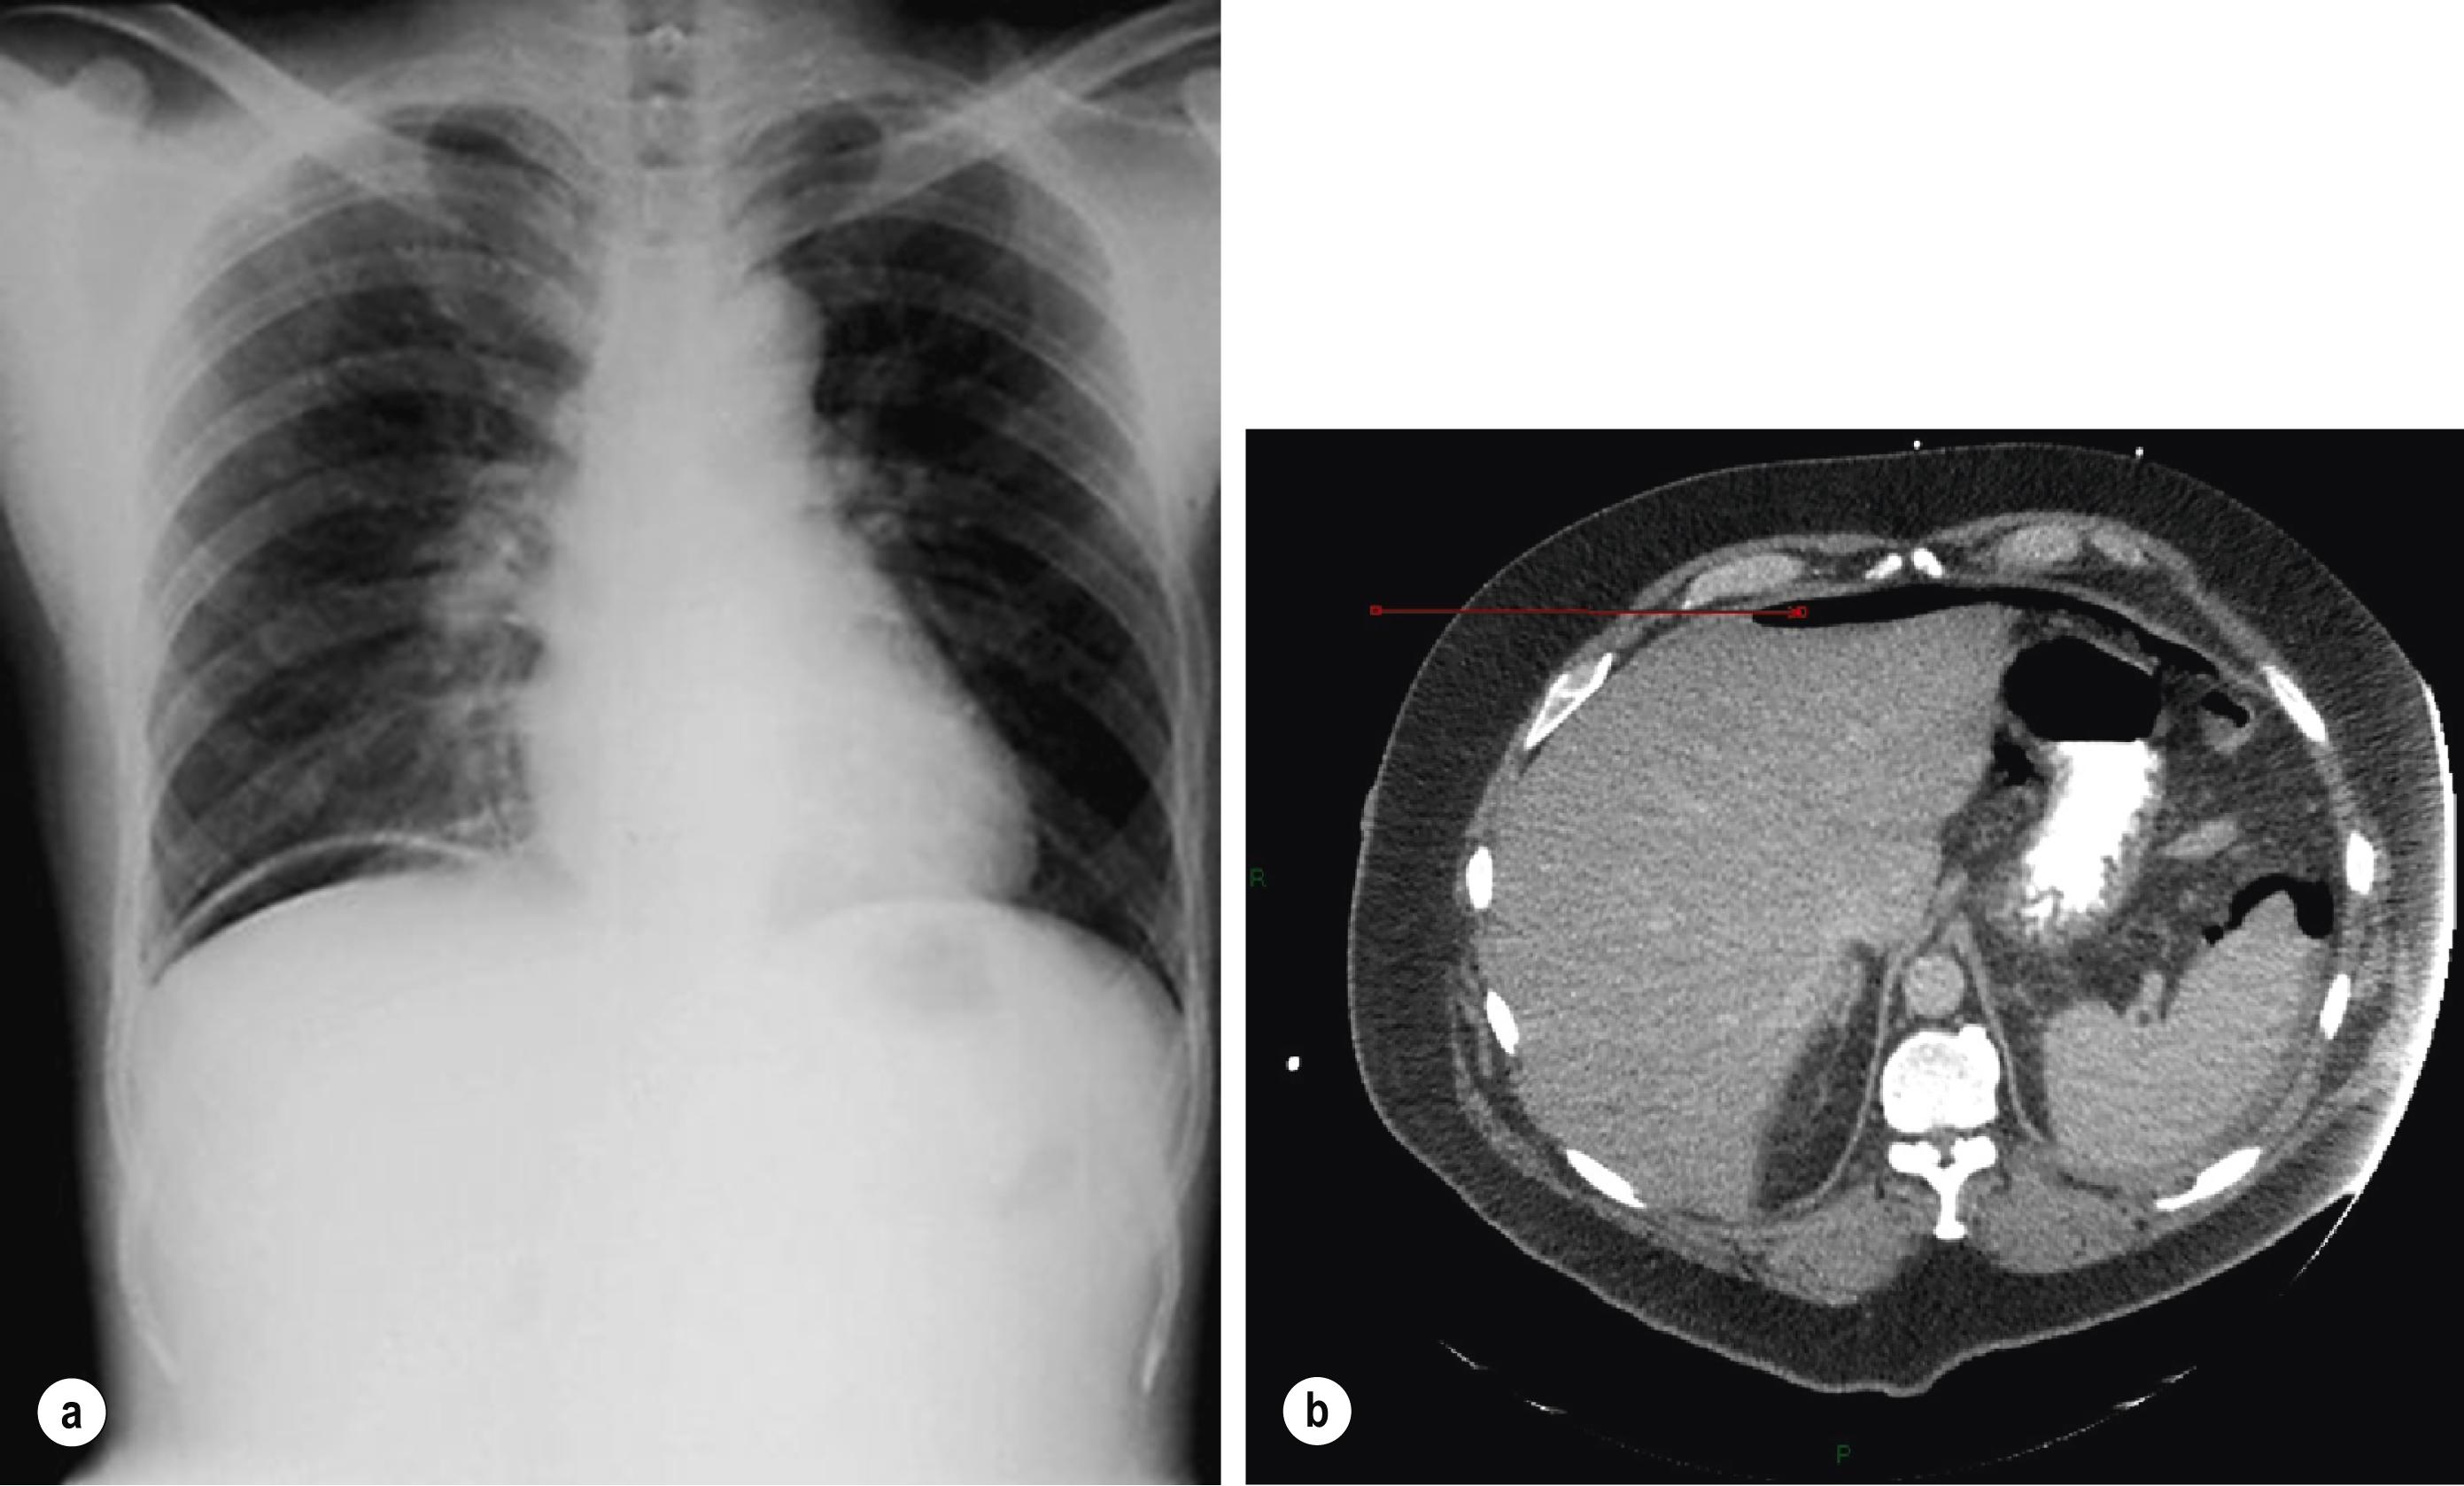 Figure 12.1, (a) Chest X-ray demonstrating right subphrenic free gas secondary to a perforated peptic ulcer. (b) Transverse section of an abdominal computed tomography scan demonstrating free intraperitoneal gas ( arrow ) in a patient presenting with a perforated peptic ulcer with normal erect chest X-ray appearances.